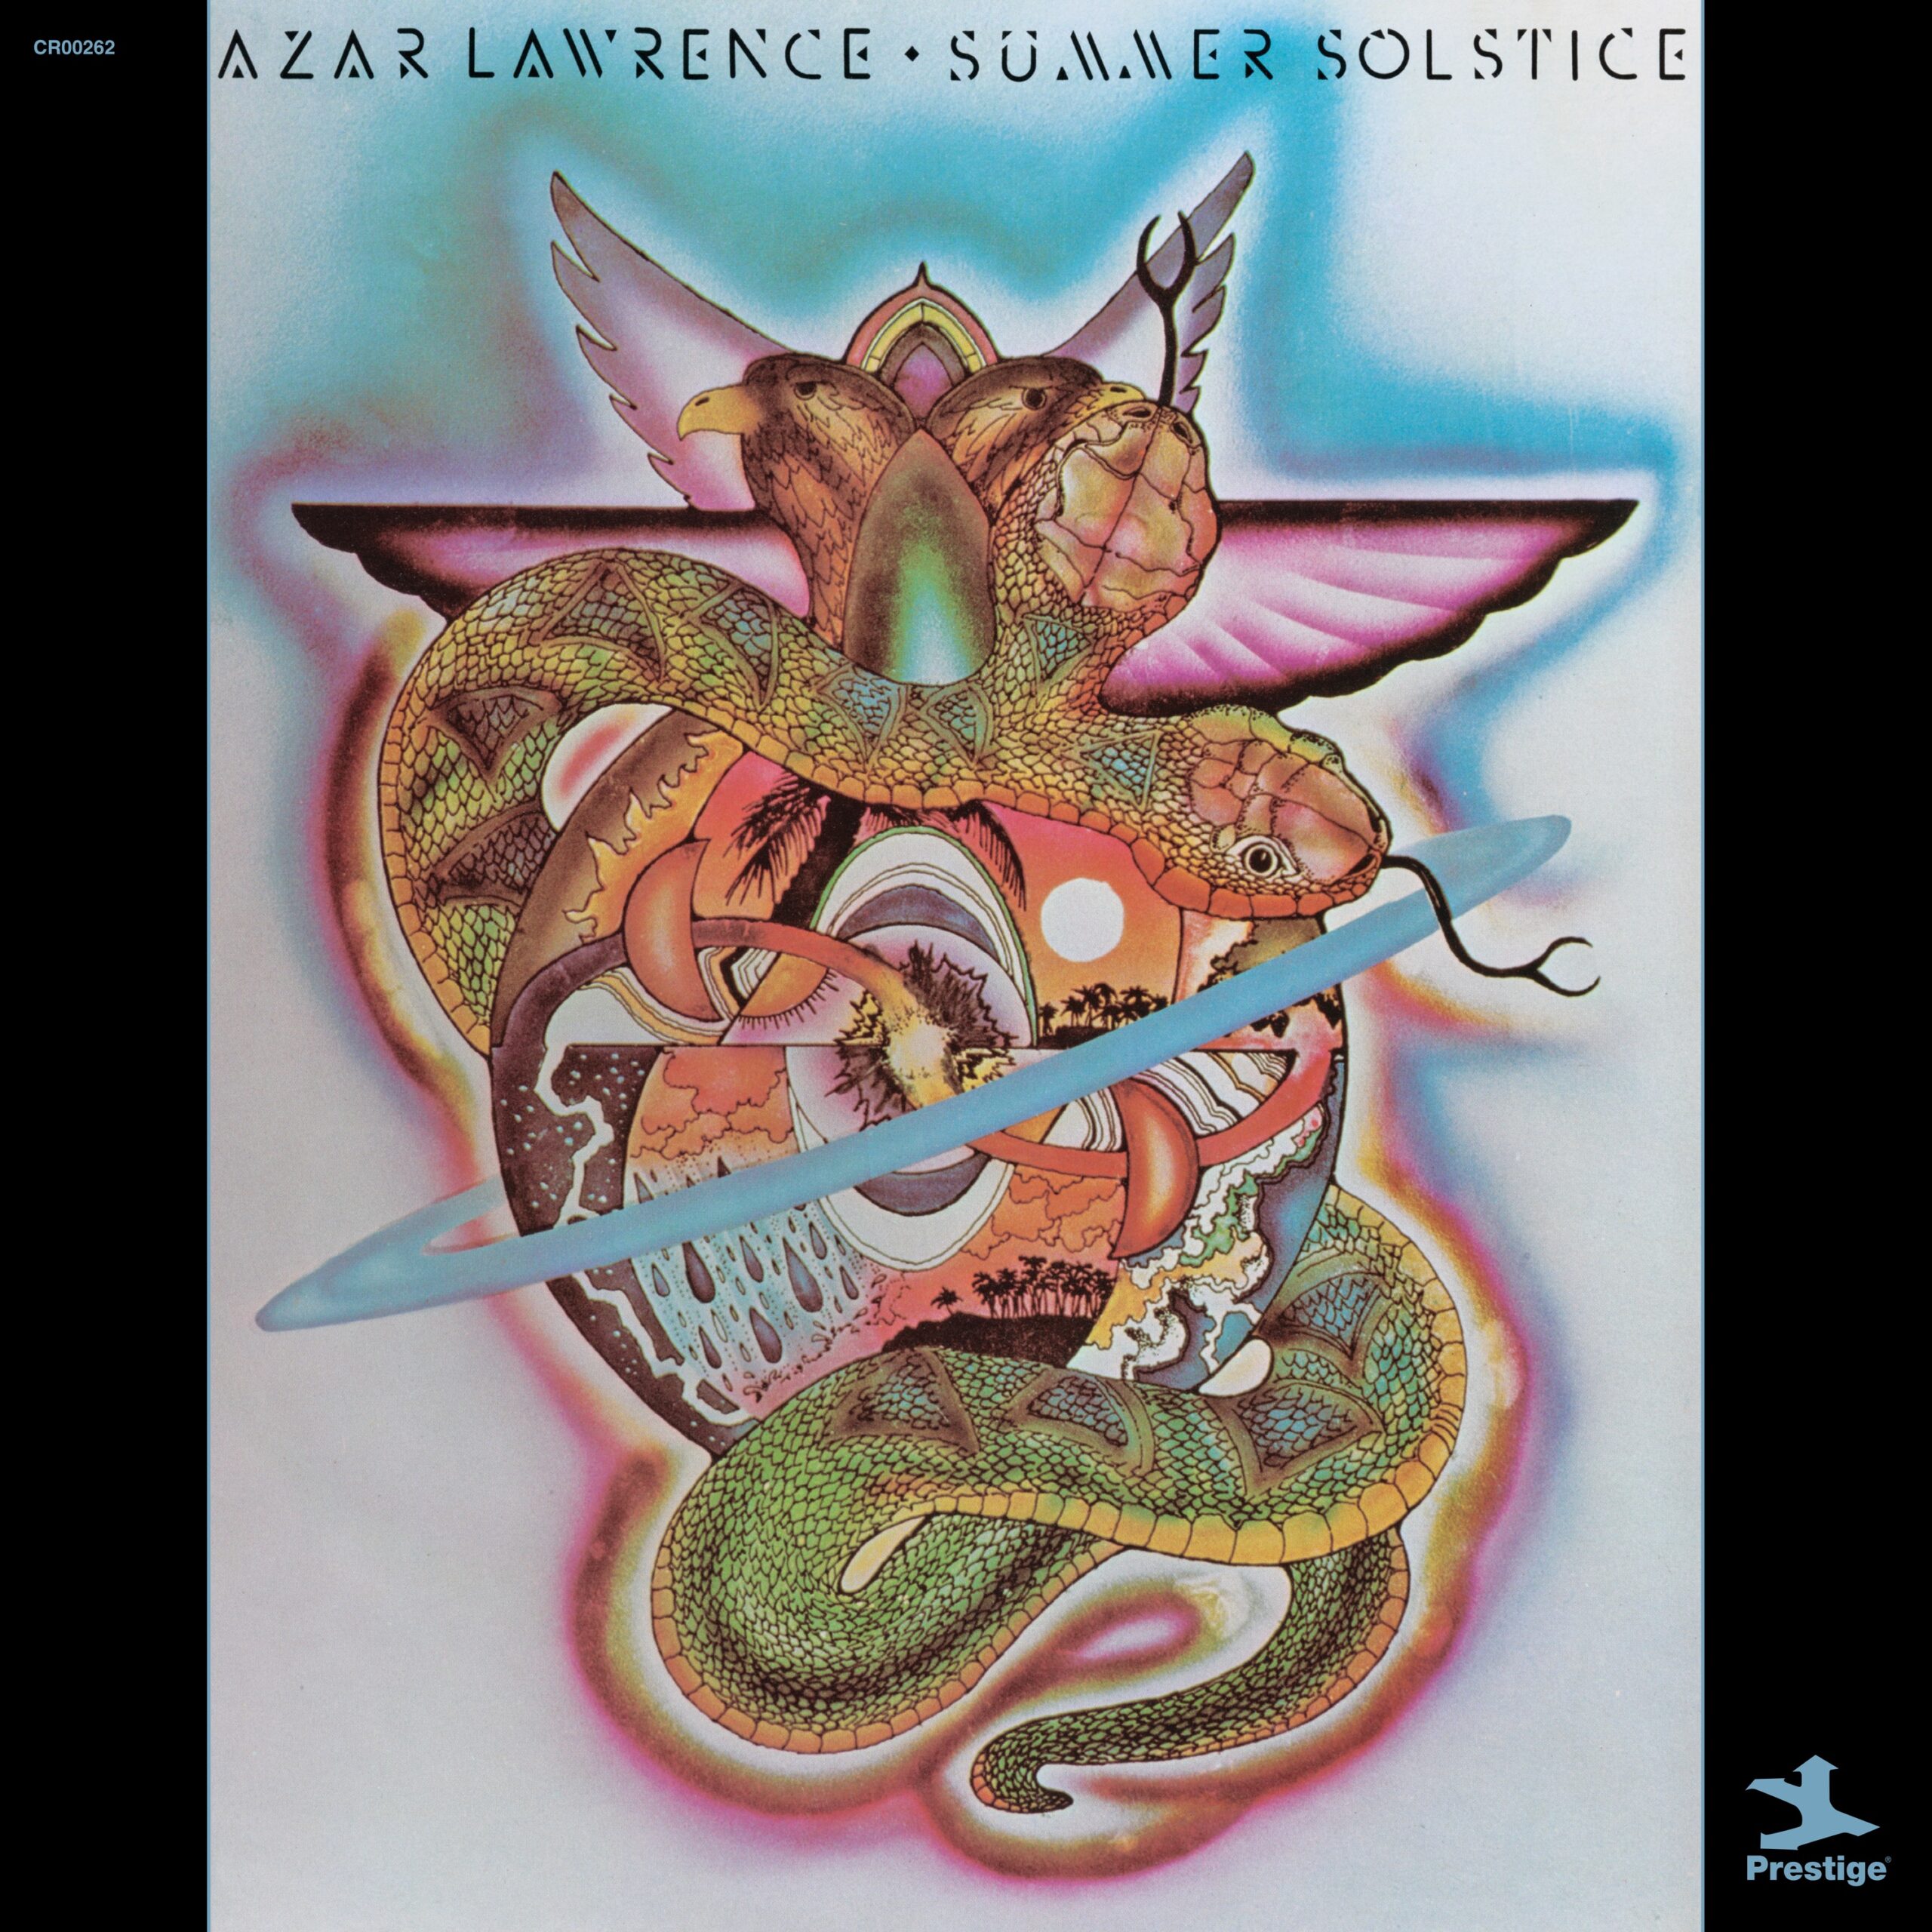 Featured Image for “Azar Lawrence – Summer Solstice”